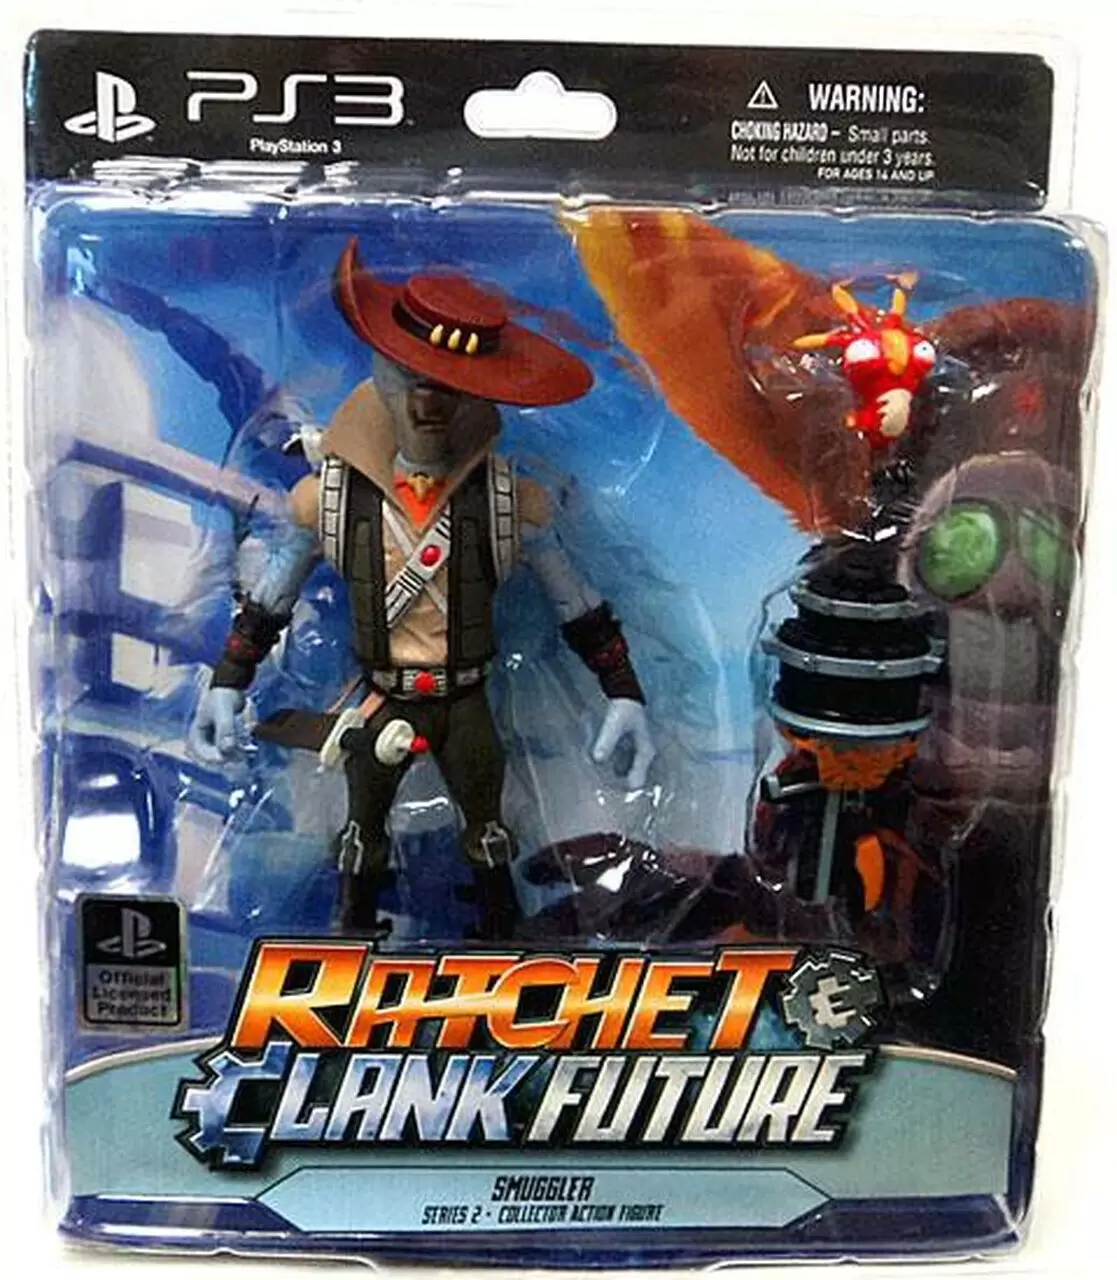 Ratchet and Clank Future - Smuggler